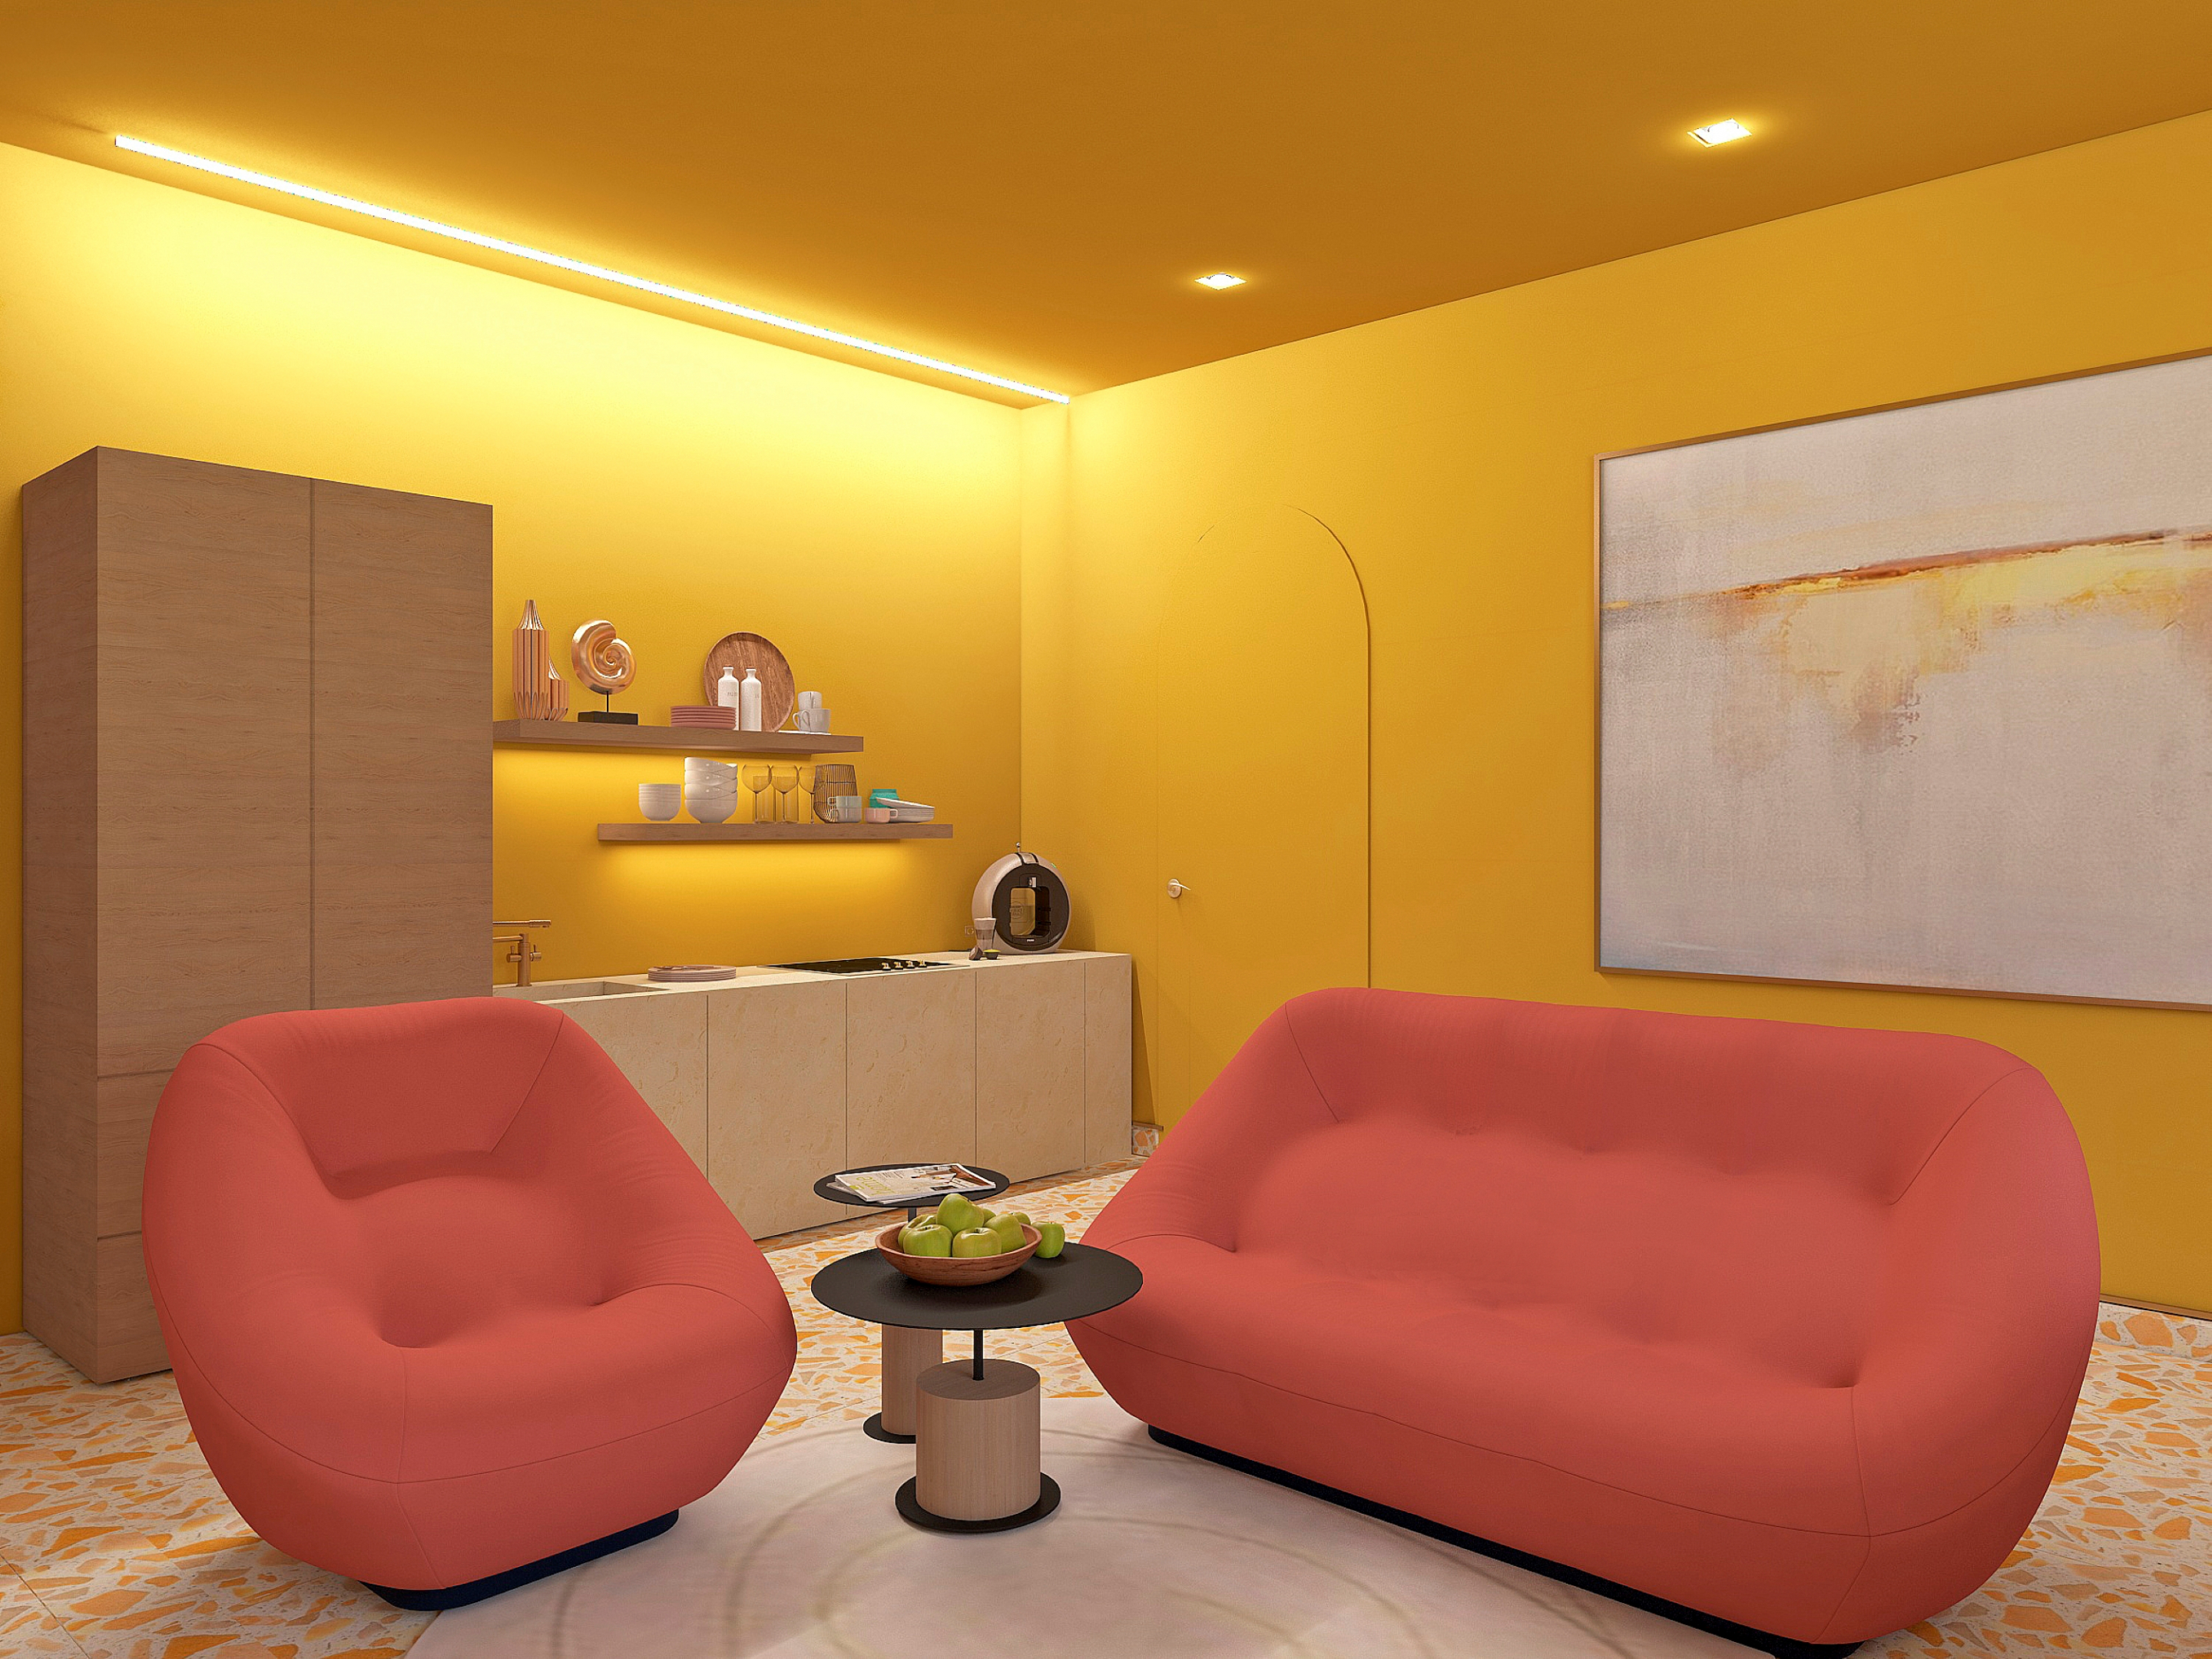 kitchen-living room "On its own wave" in 3d max vray 3.0 image